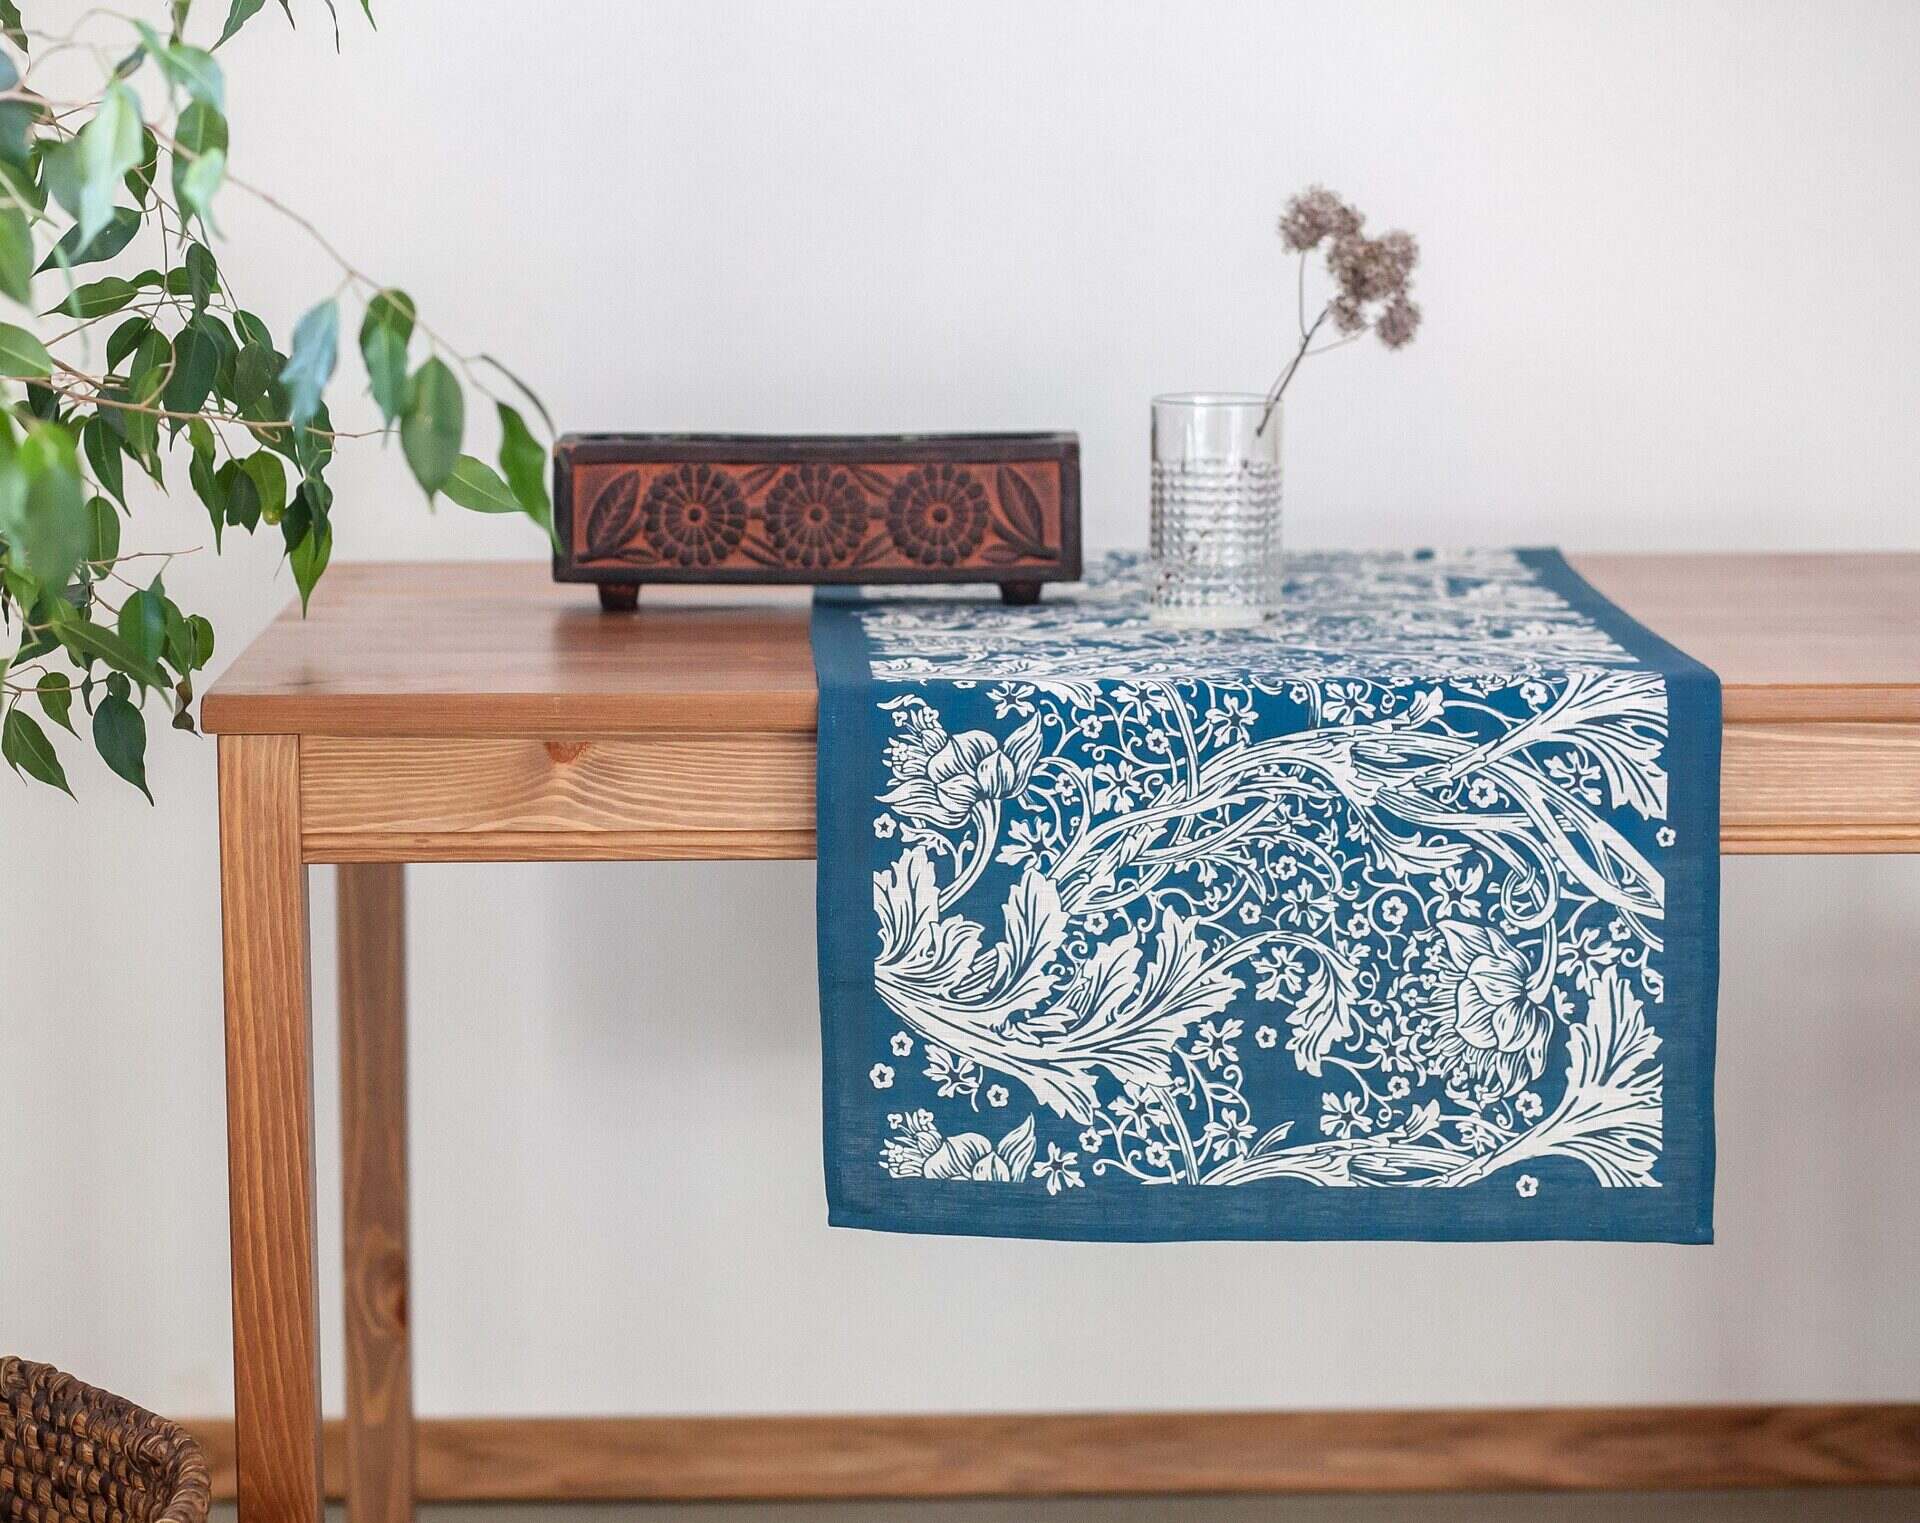 How Do You Style A Table Runner?